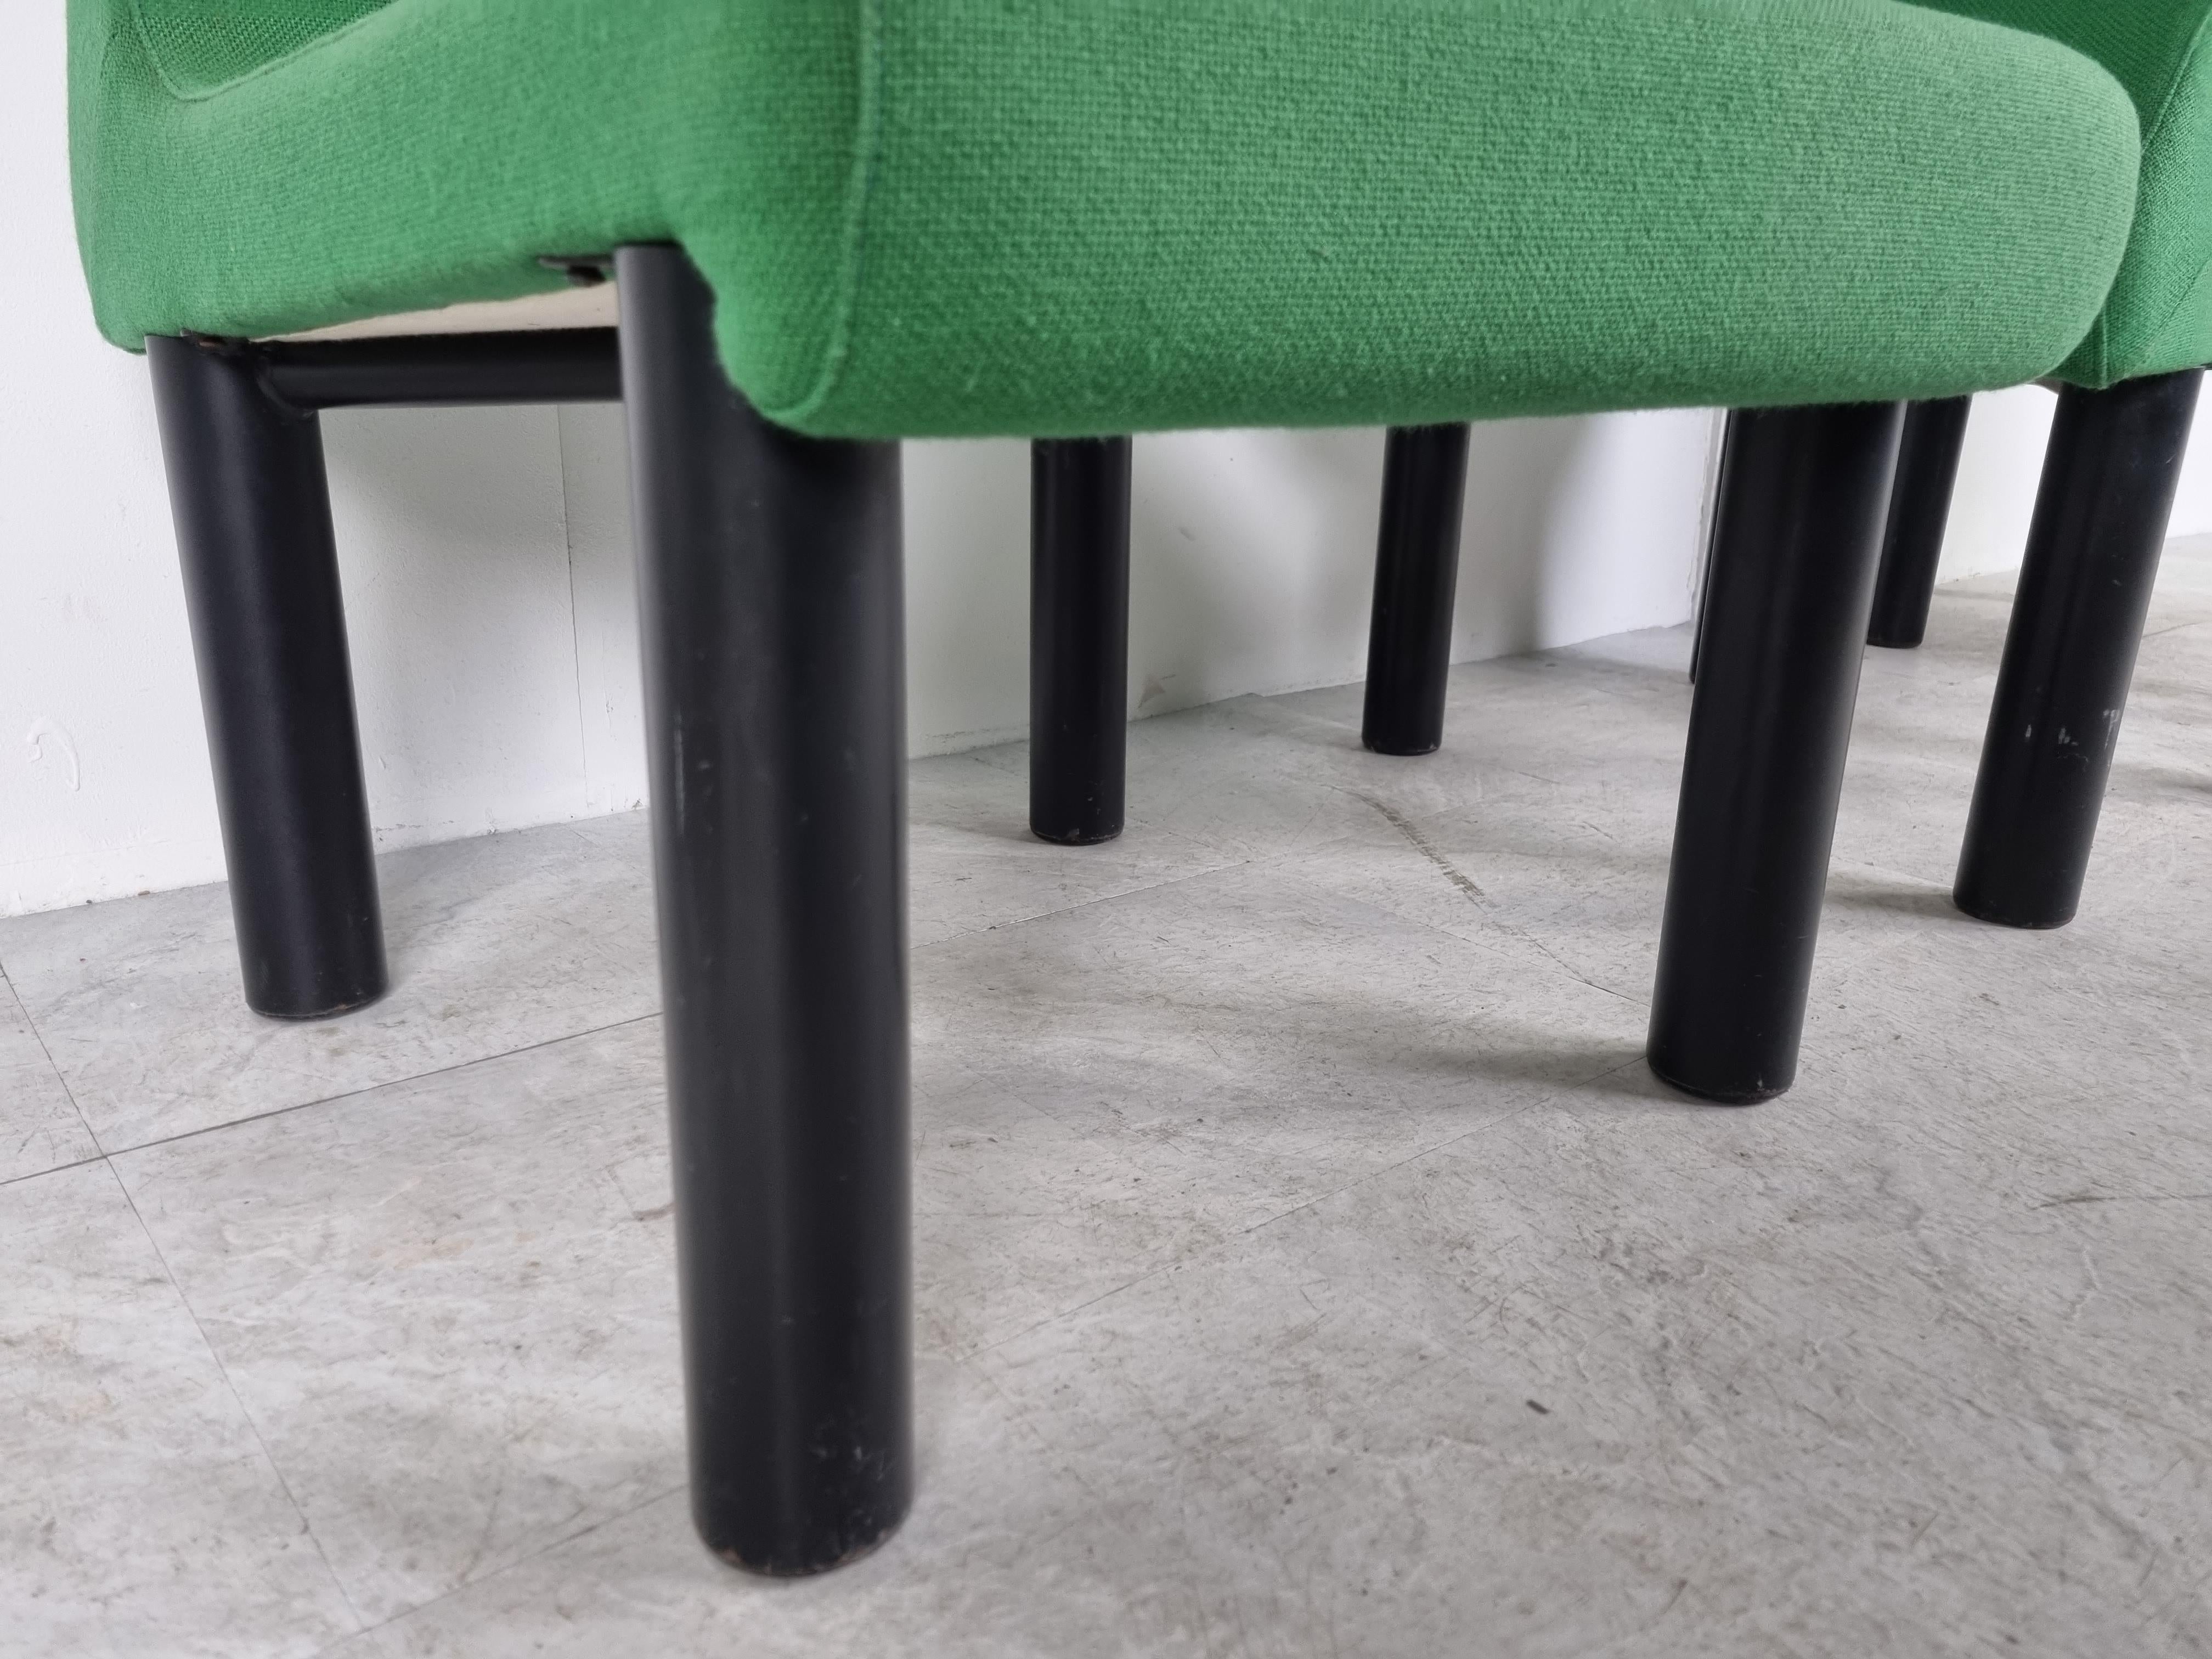 Design lounge chairs from the 1980s.

Attractive and playful design.

Designer unknown.

Green fabric and black metal cylindrical legs.

1980s - Italy

Very good condition

Dimensions:
Height: 80cm/31.49